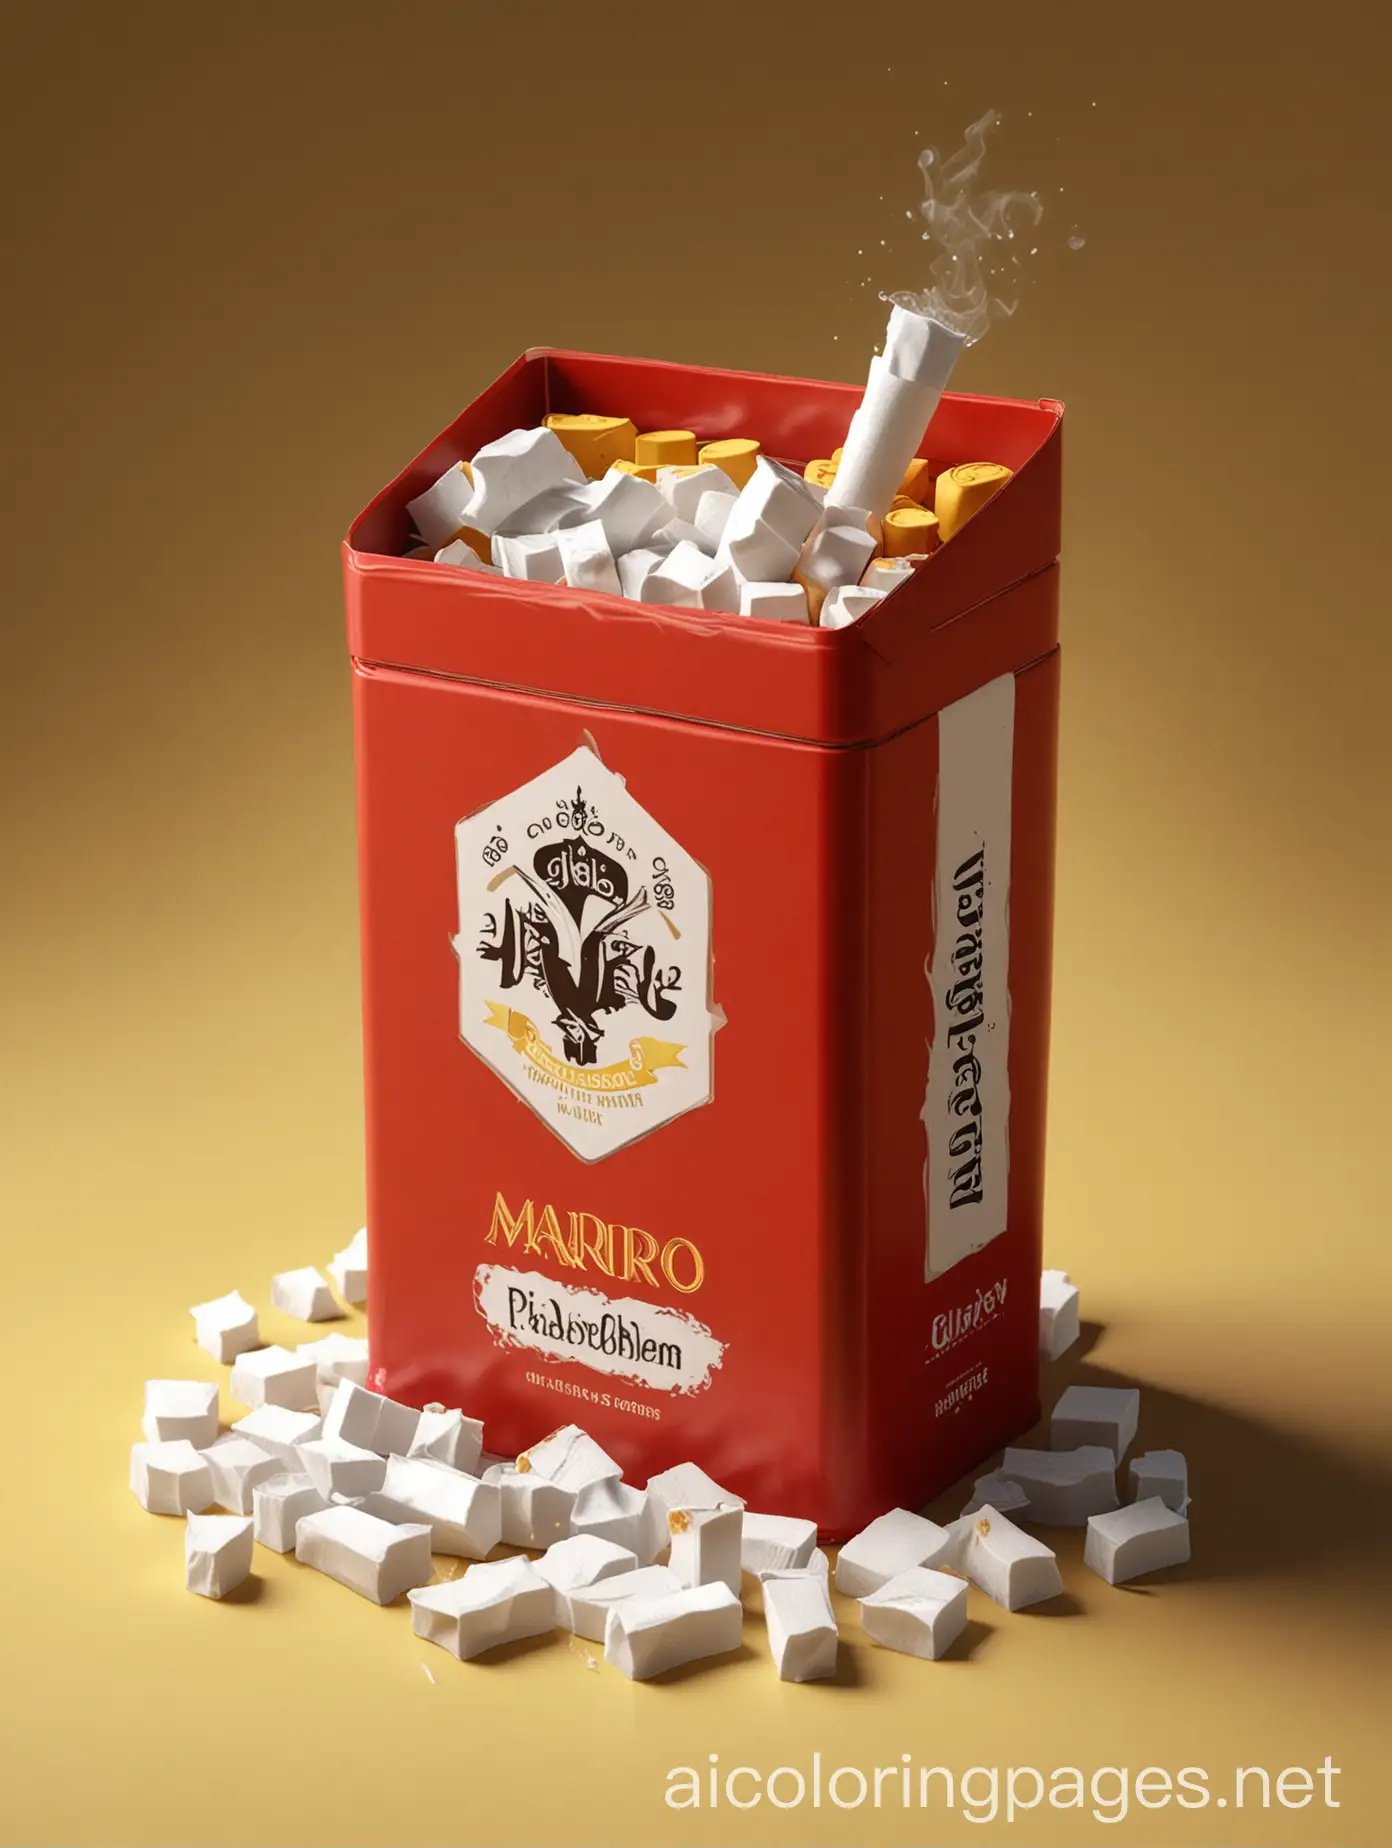 3D Marlboro cigarette box in dark red, pieces of ice flying around in a circular manner, dark yellow background, cinematic lighting around the box, shadow and light under the box, Coloring Page, black and white, line art, white background, Simplicity, Ample White Space. The background of the coloring page is plain white to make it easy for young children to color within the lines. The outlines of all the subjects are easy to distinguish, making it simple for kids to color without too much difficulty